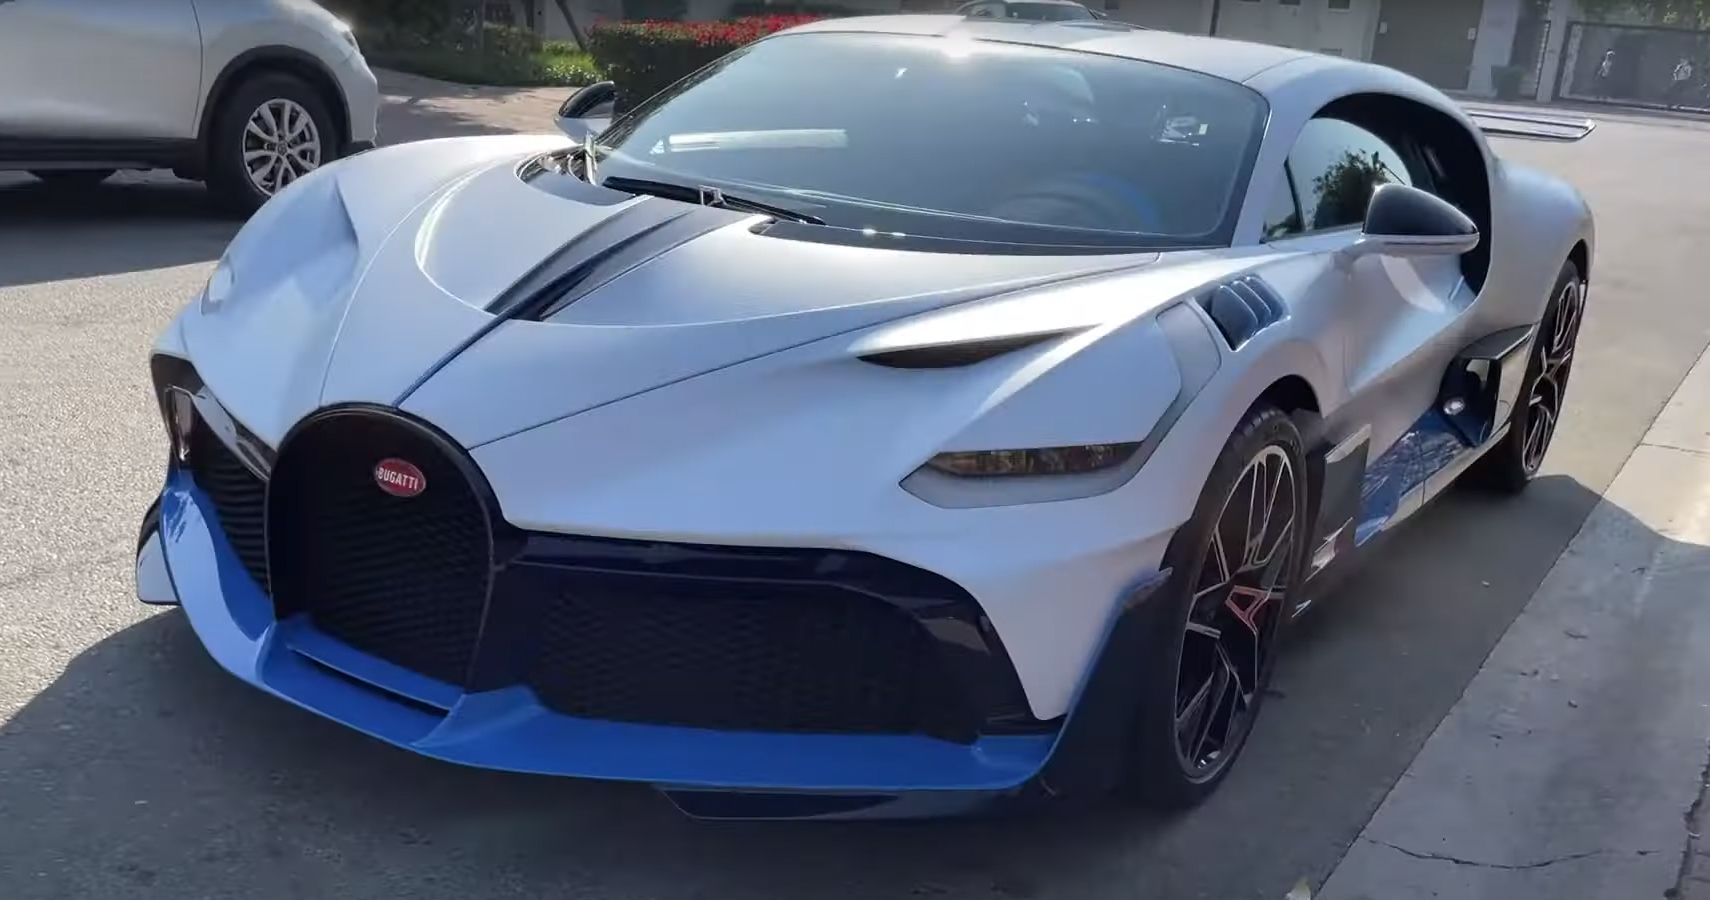 Blue and white Bugatti Divo parked on city street